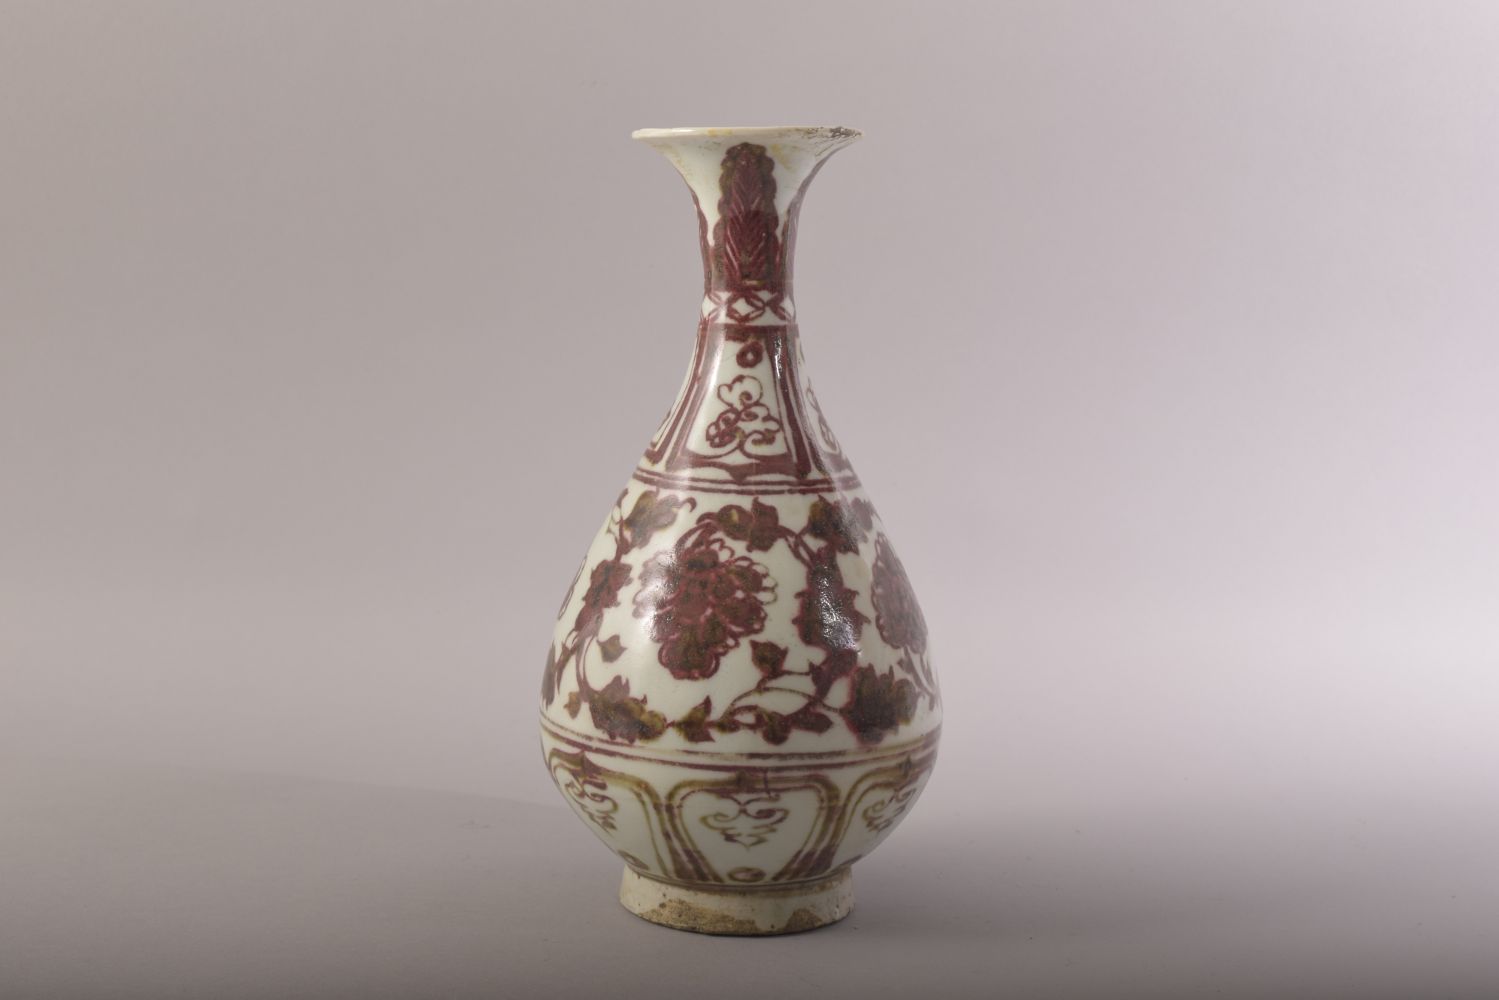 A CHINESE IRON RED AND WHITE GLAZED POTTERY VASE, decorated with floral motifs, 24.5cm high. - Image 2 of 6